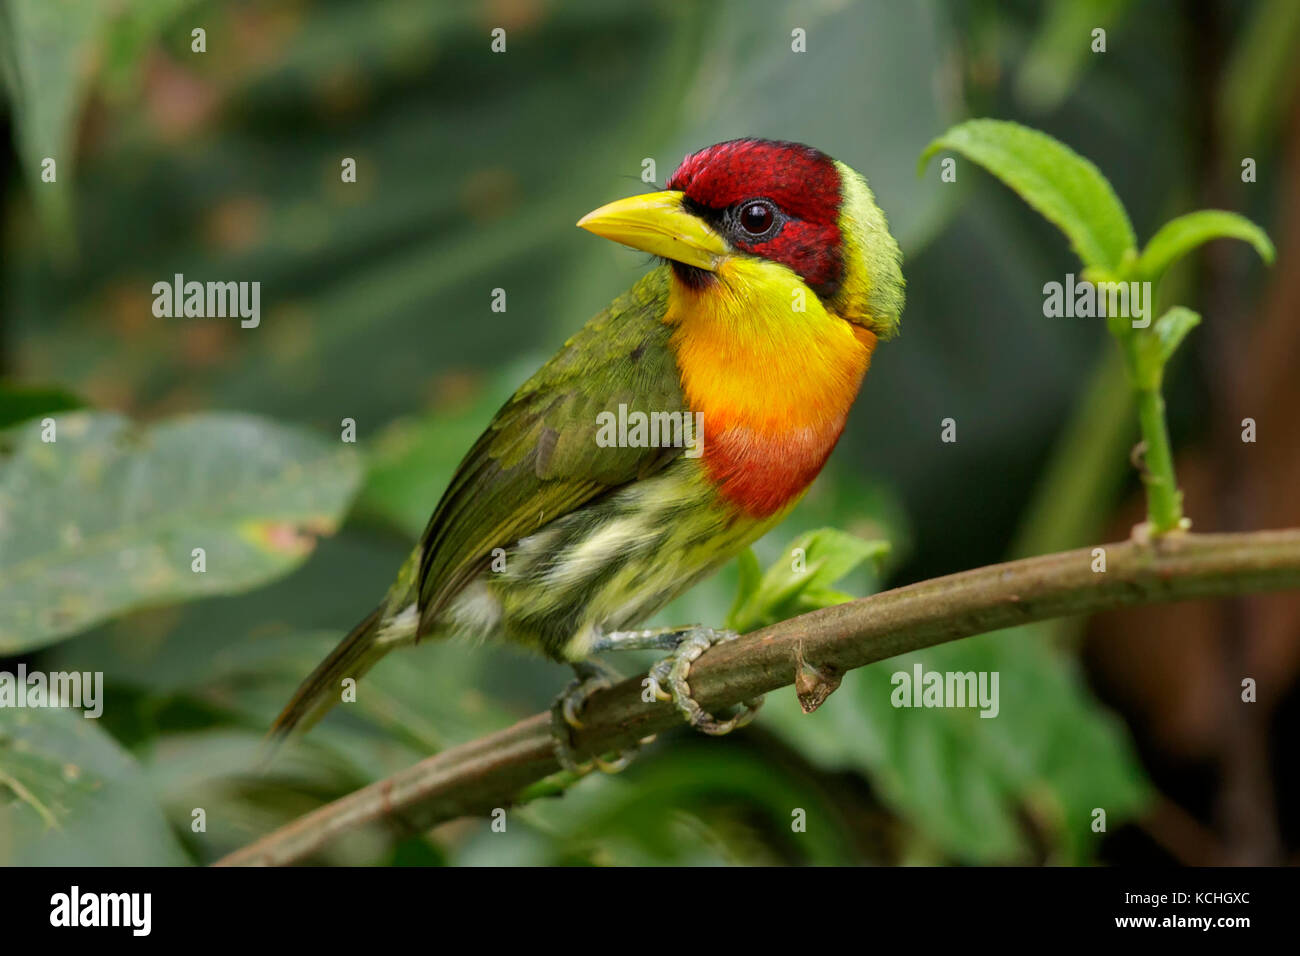 perched on a branch in Manu National Park, Peru Stock Photo